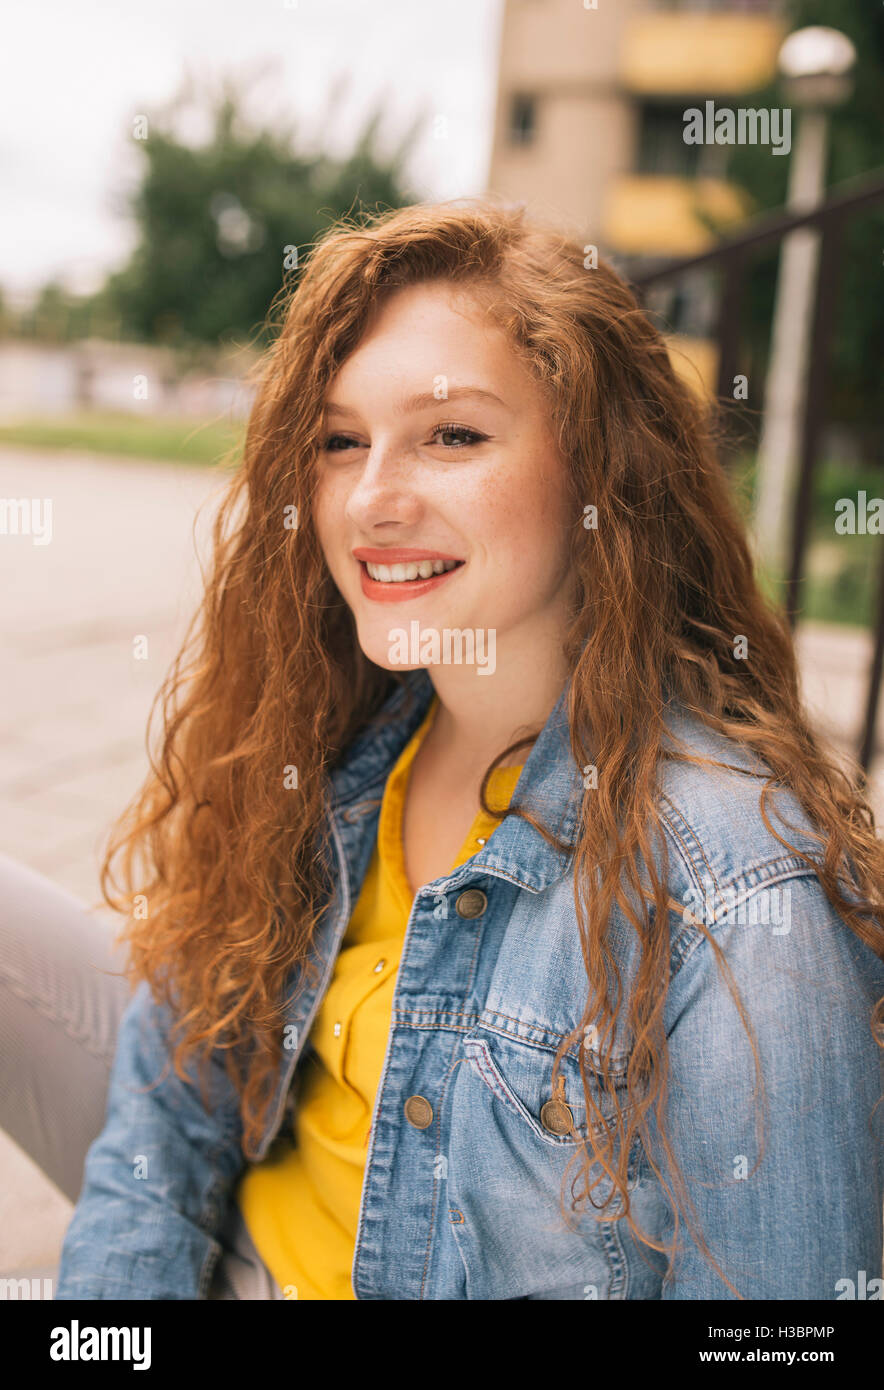 Portrait of a young redhead woman smiling Stock Photo